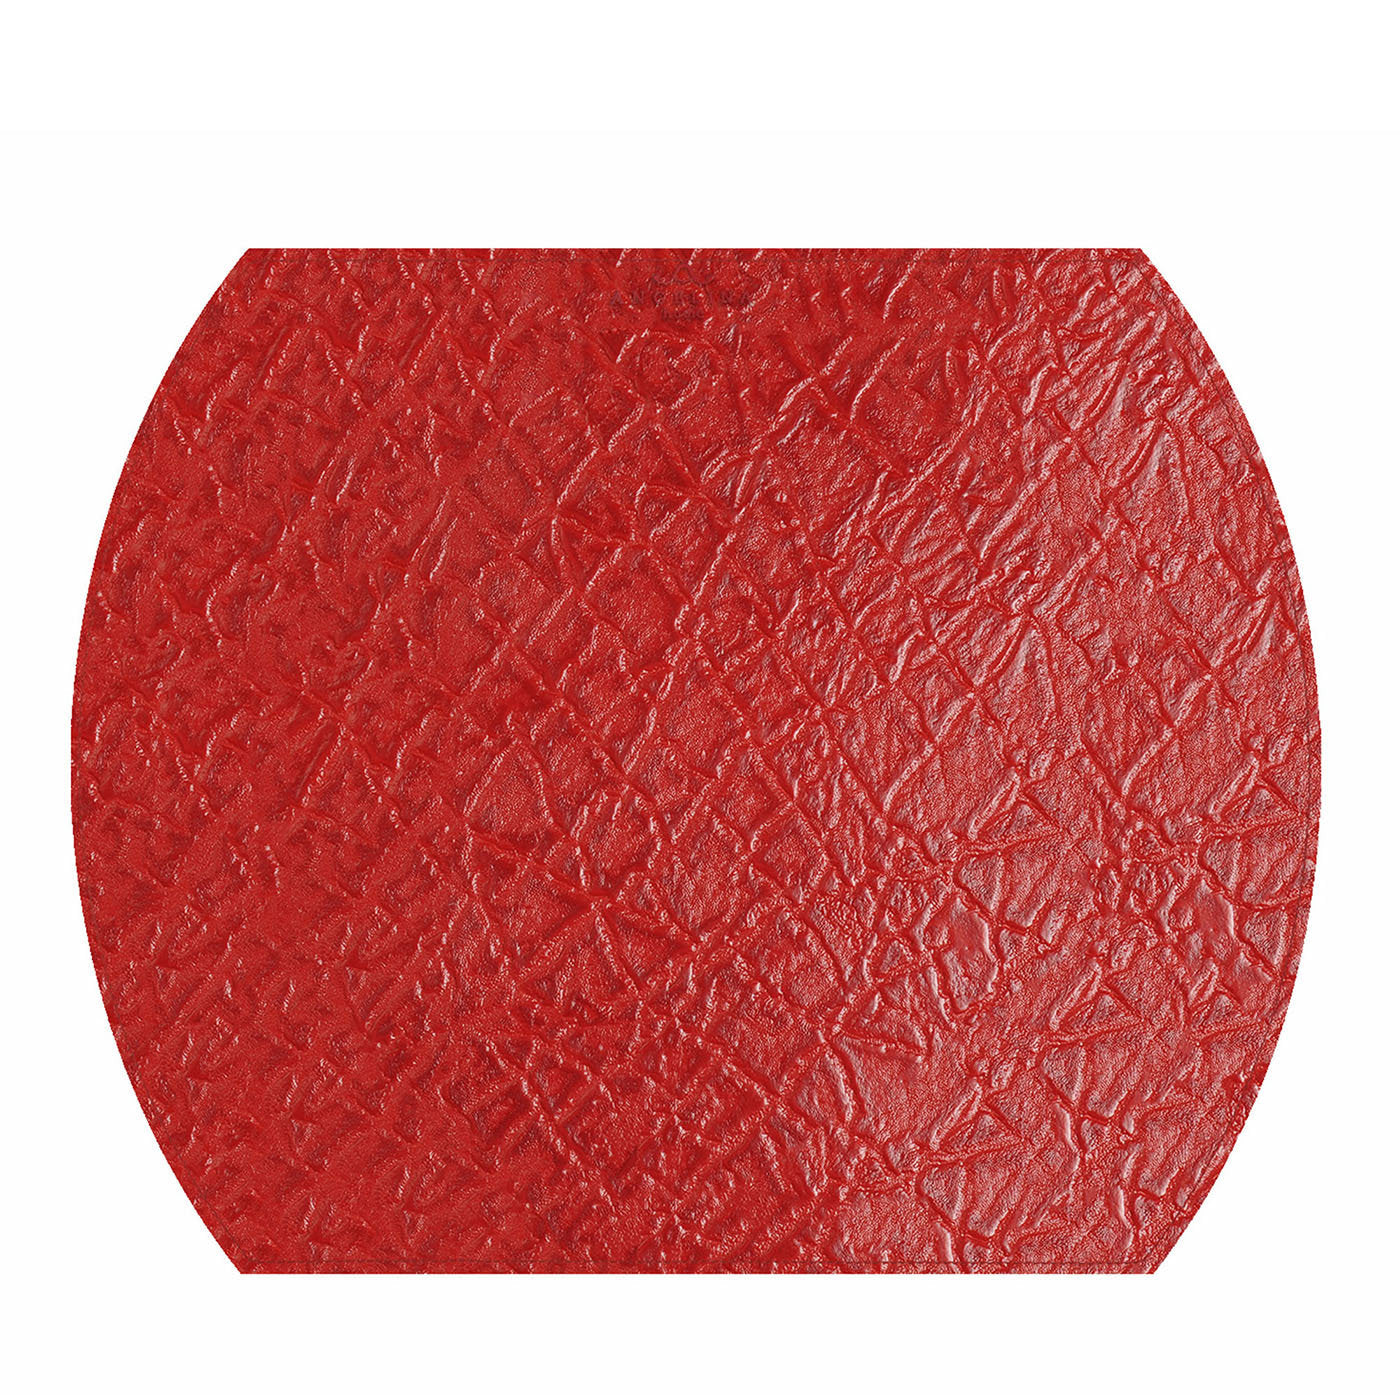 Tanzania Medium Set of 2 Red Leather Placemats - Alternative view 2